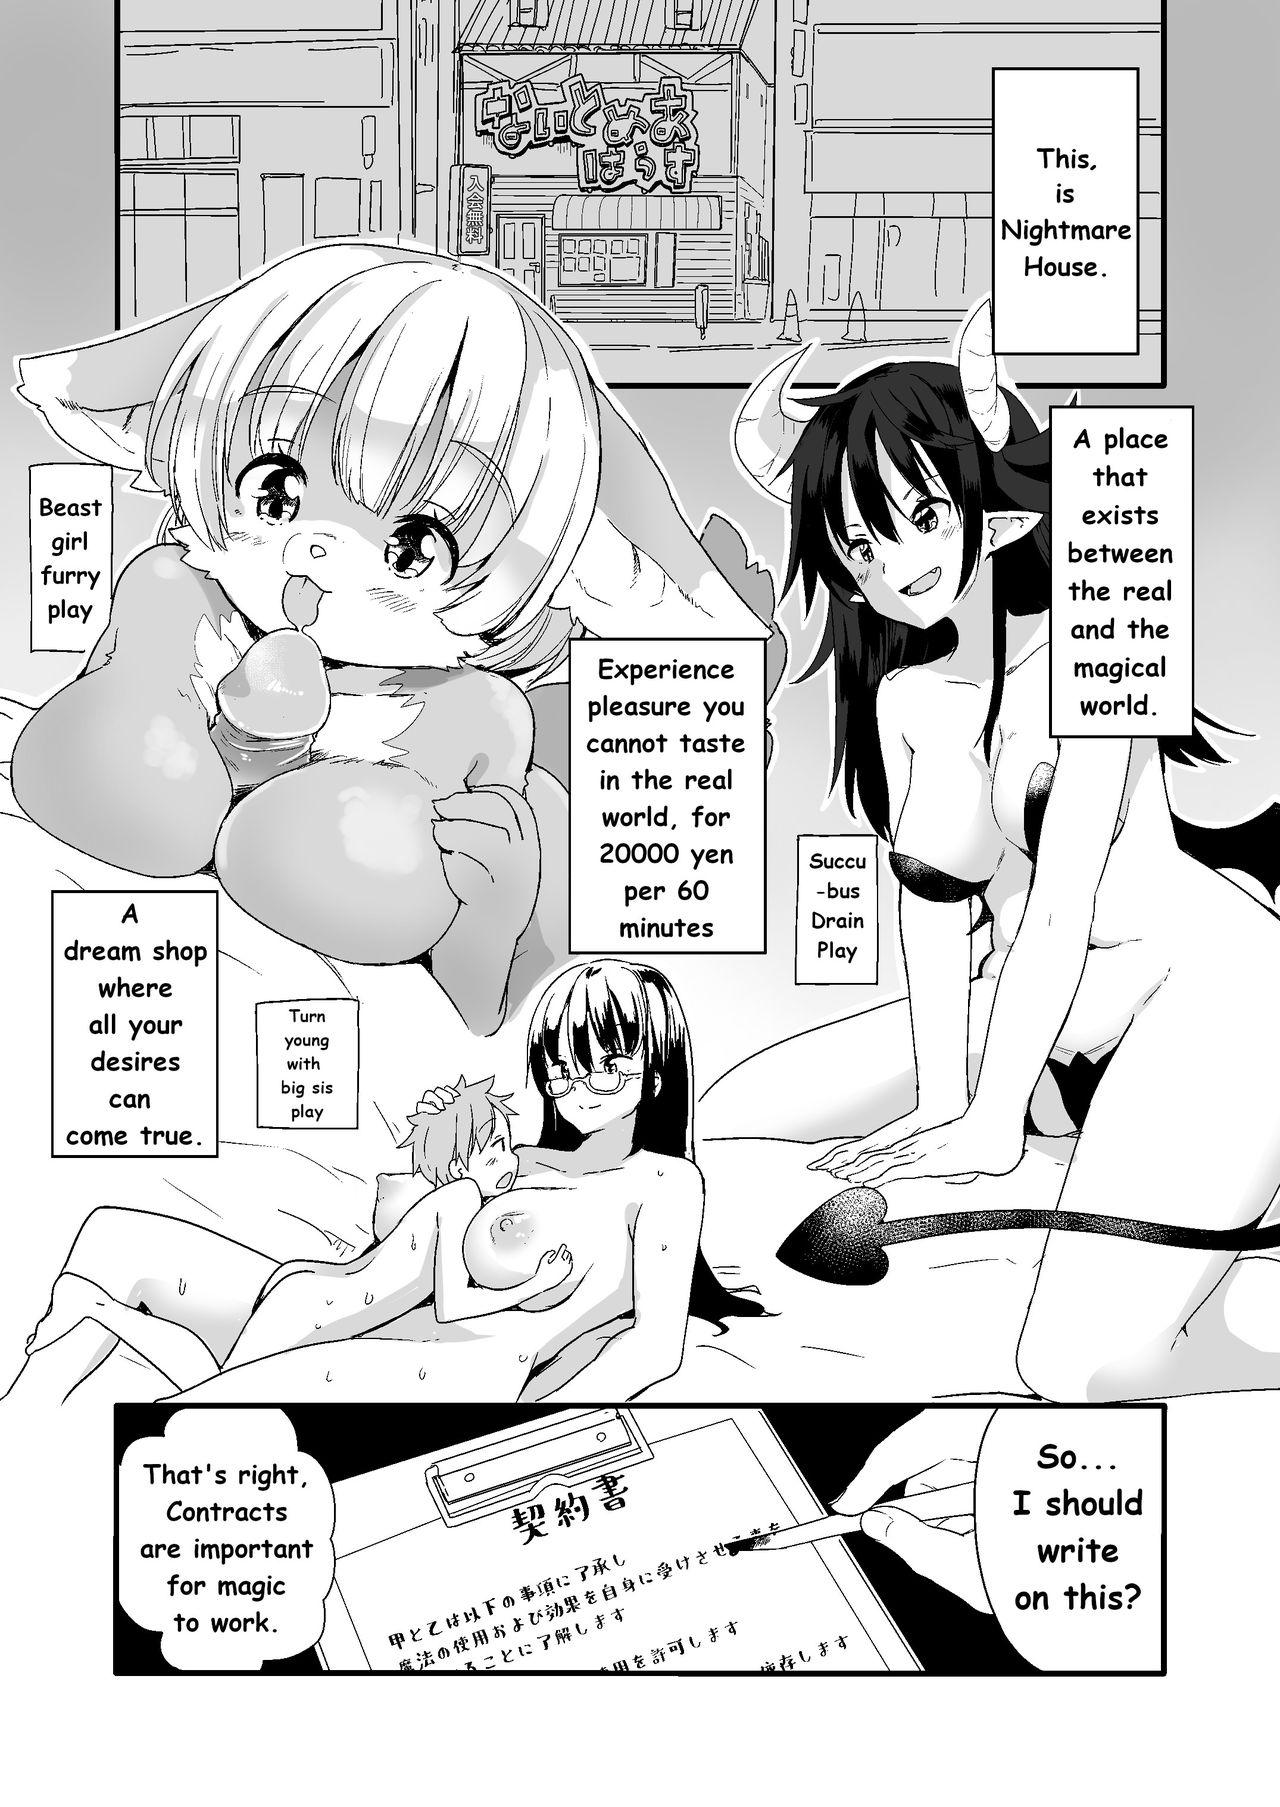 Amatur Porn Nightmare House e Youkoso | Welcome to the Nightmare House - Original Hotporn - Page 1